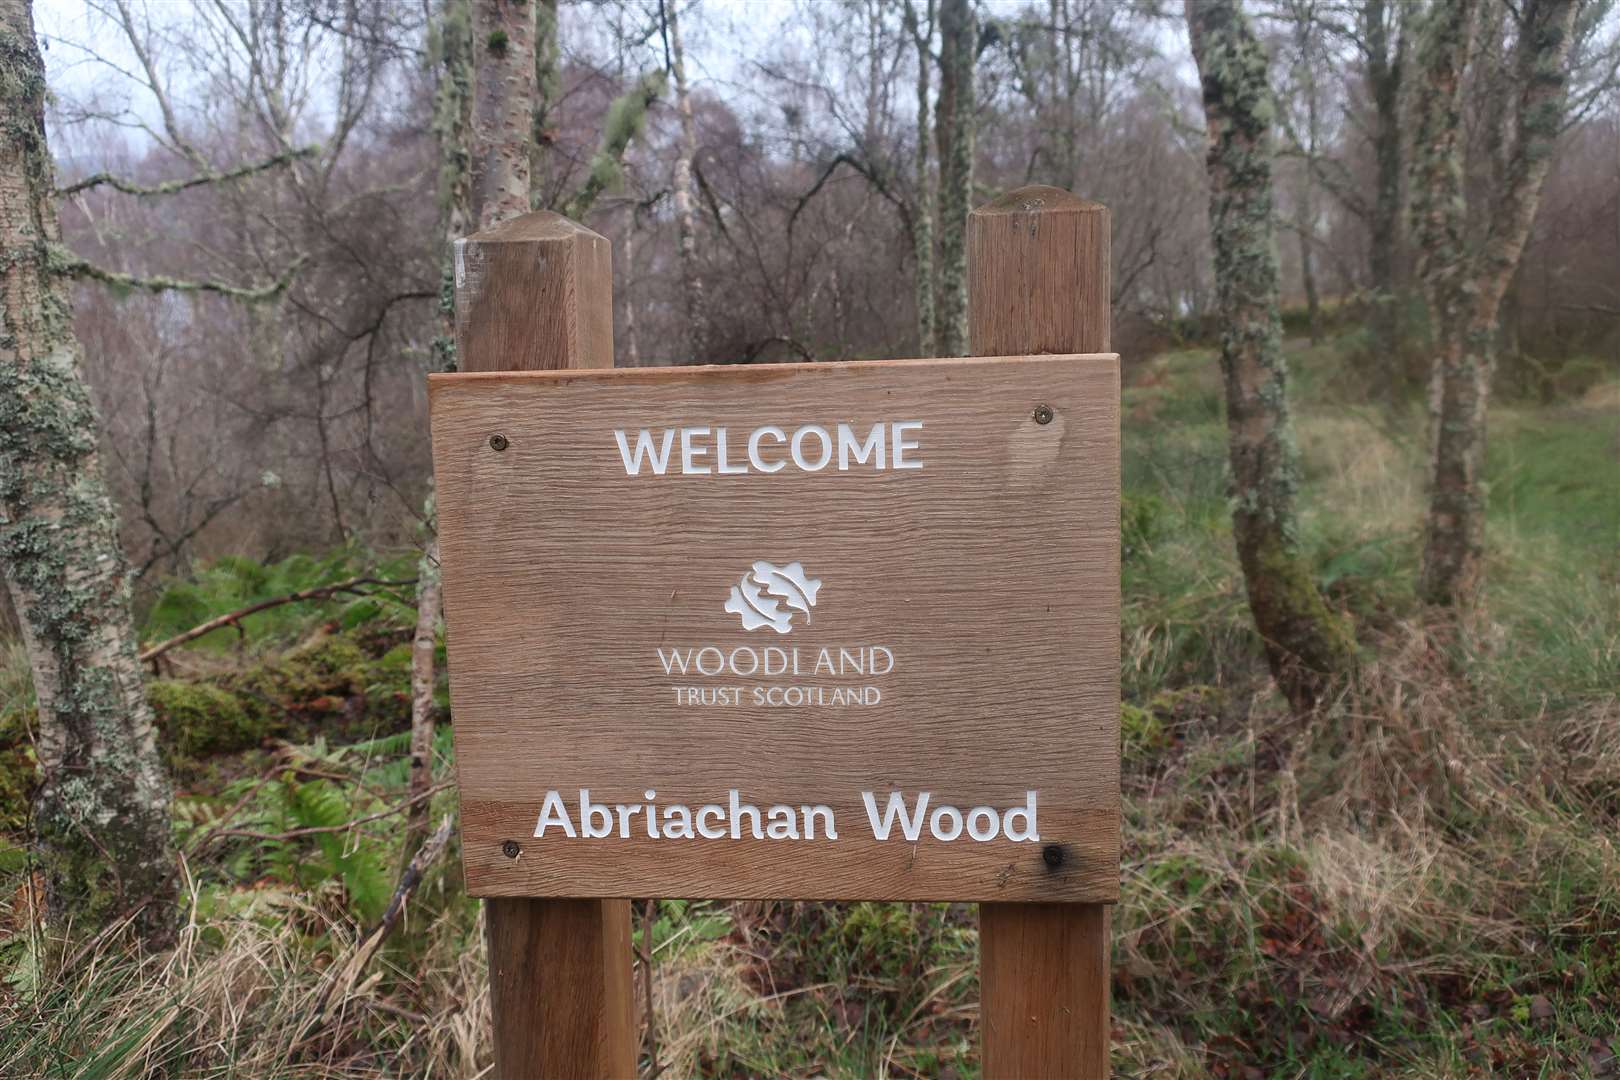 A new outdoor nursery is set to open in woodland near Abriachan.